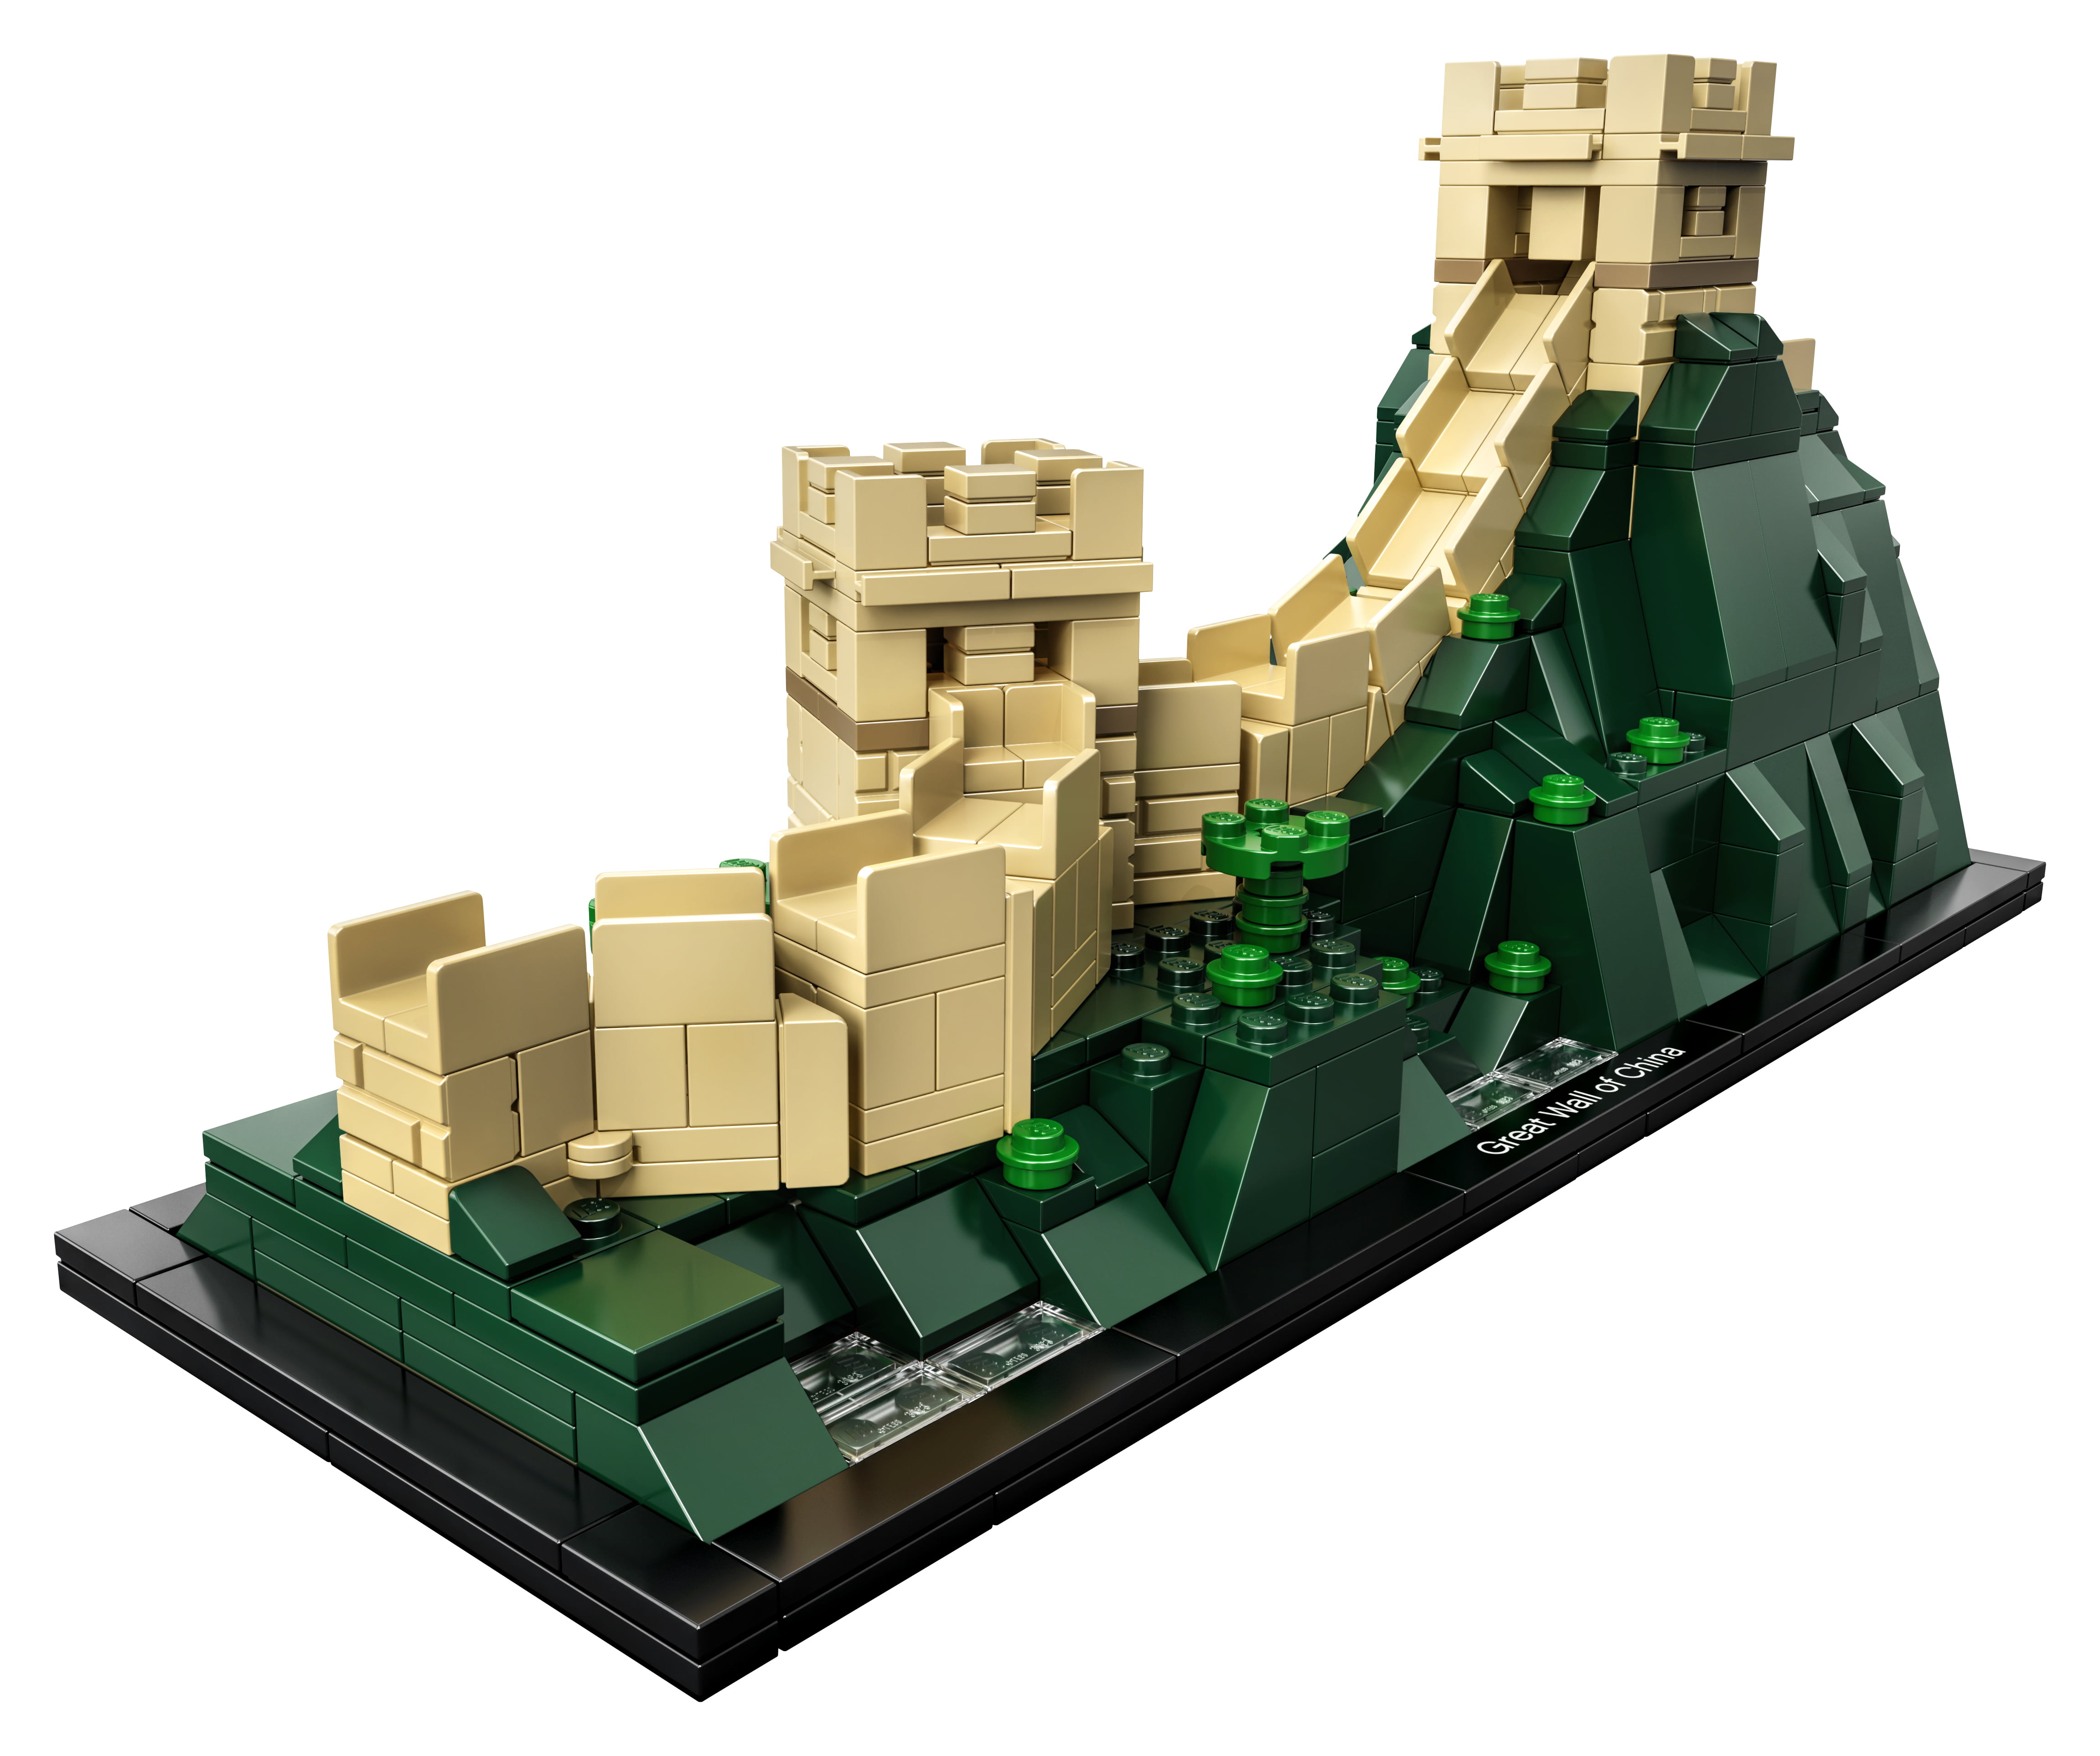 glide bad Sow LEGO Architecture Great Wall of China 21041 - Walmart.com